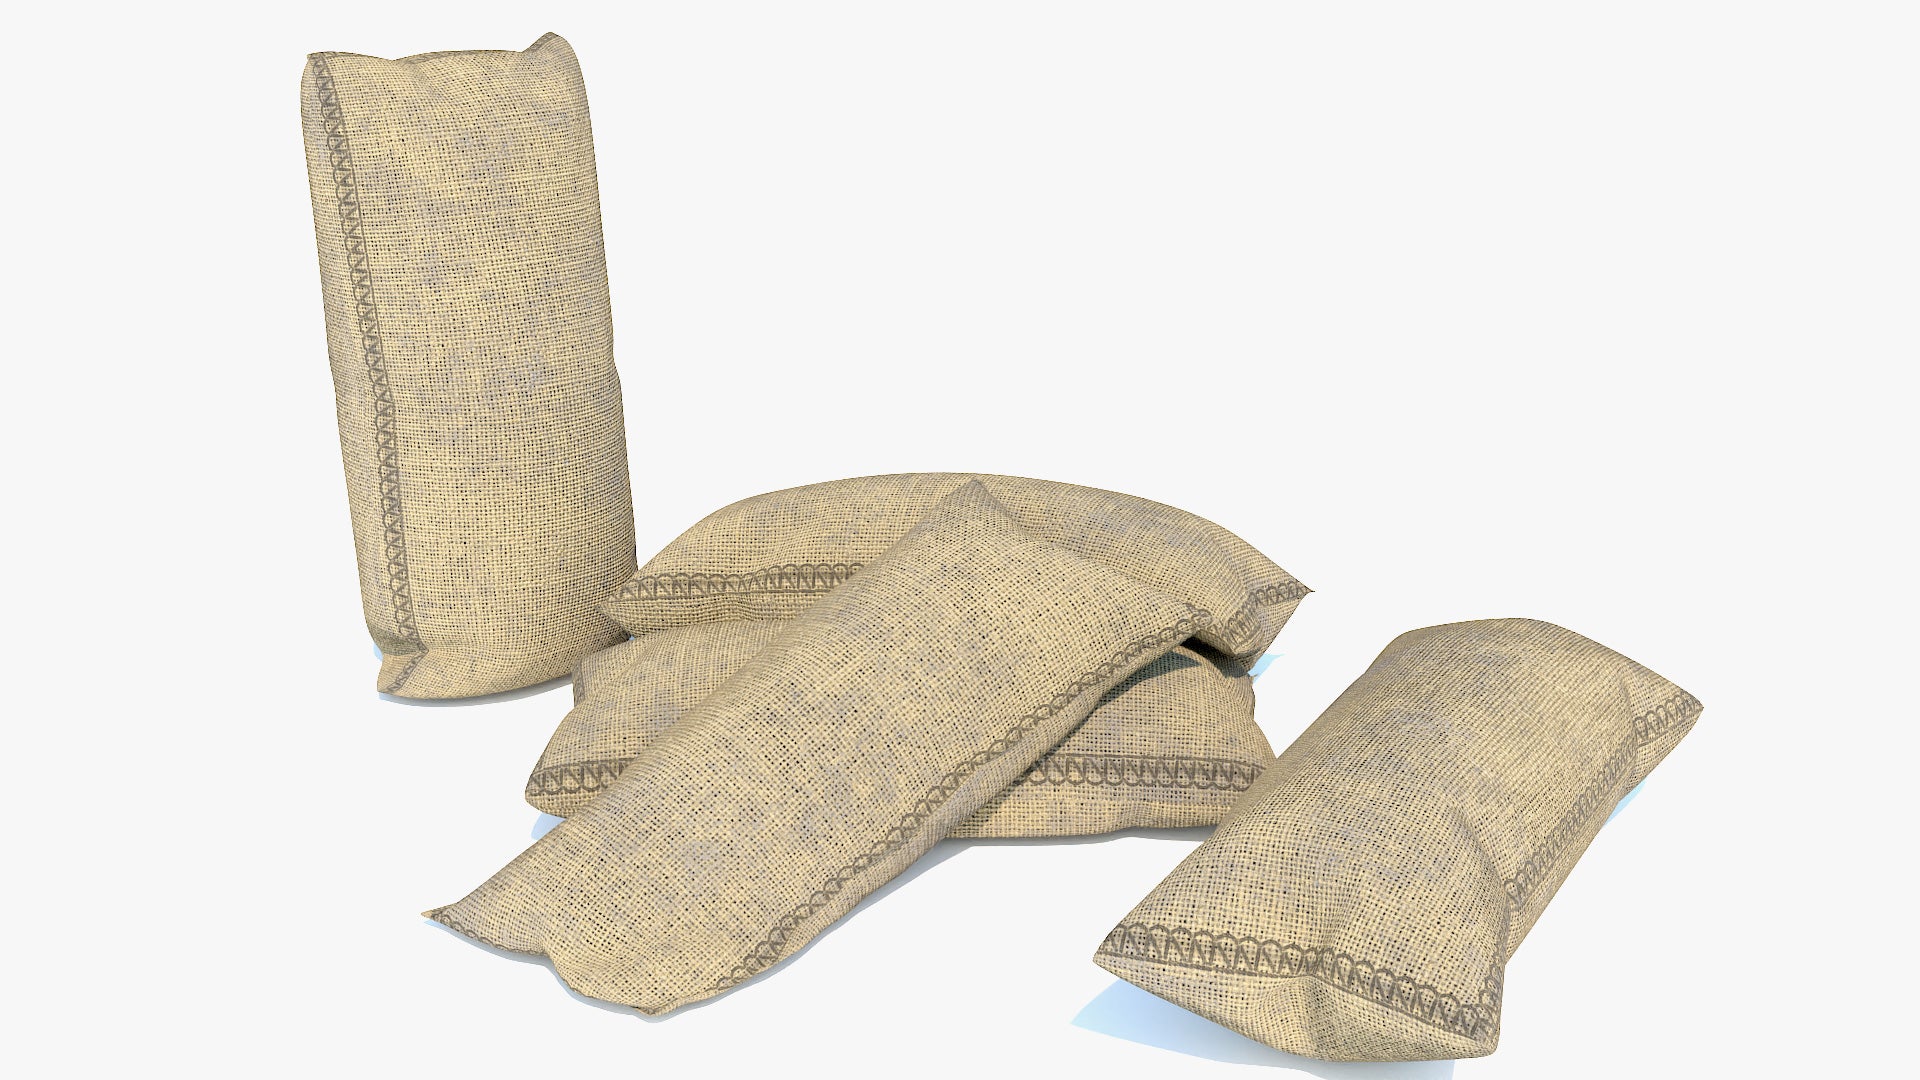 Burlap sacks for grain or merchants, 3D model for Blender and OBJ with lowpoly and PBR textures by Heledahn